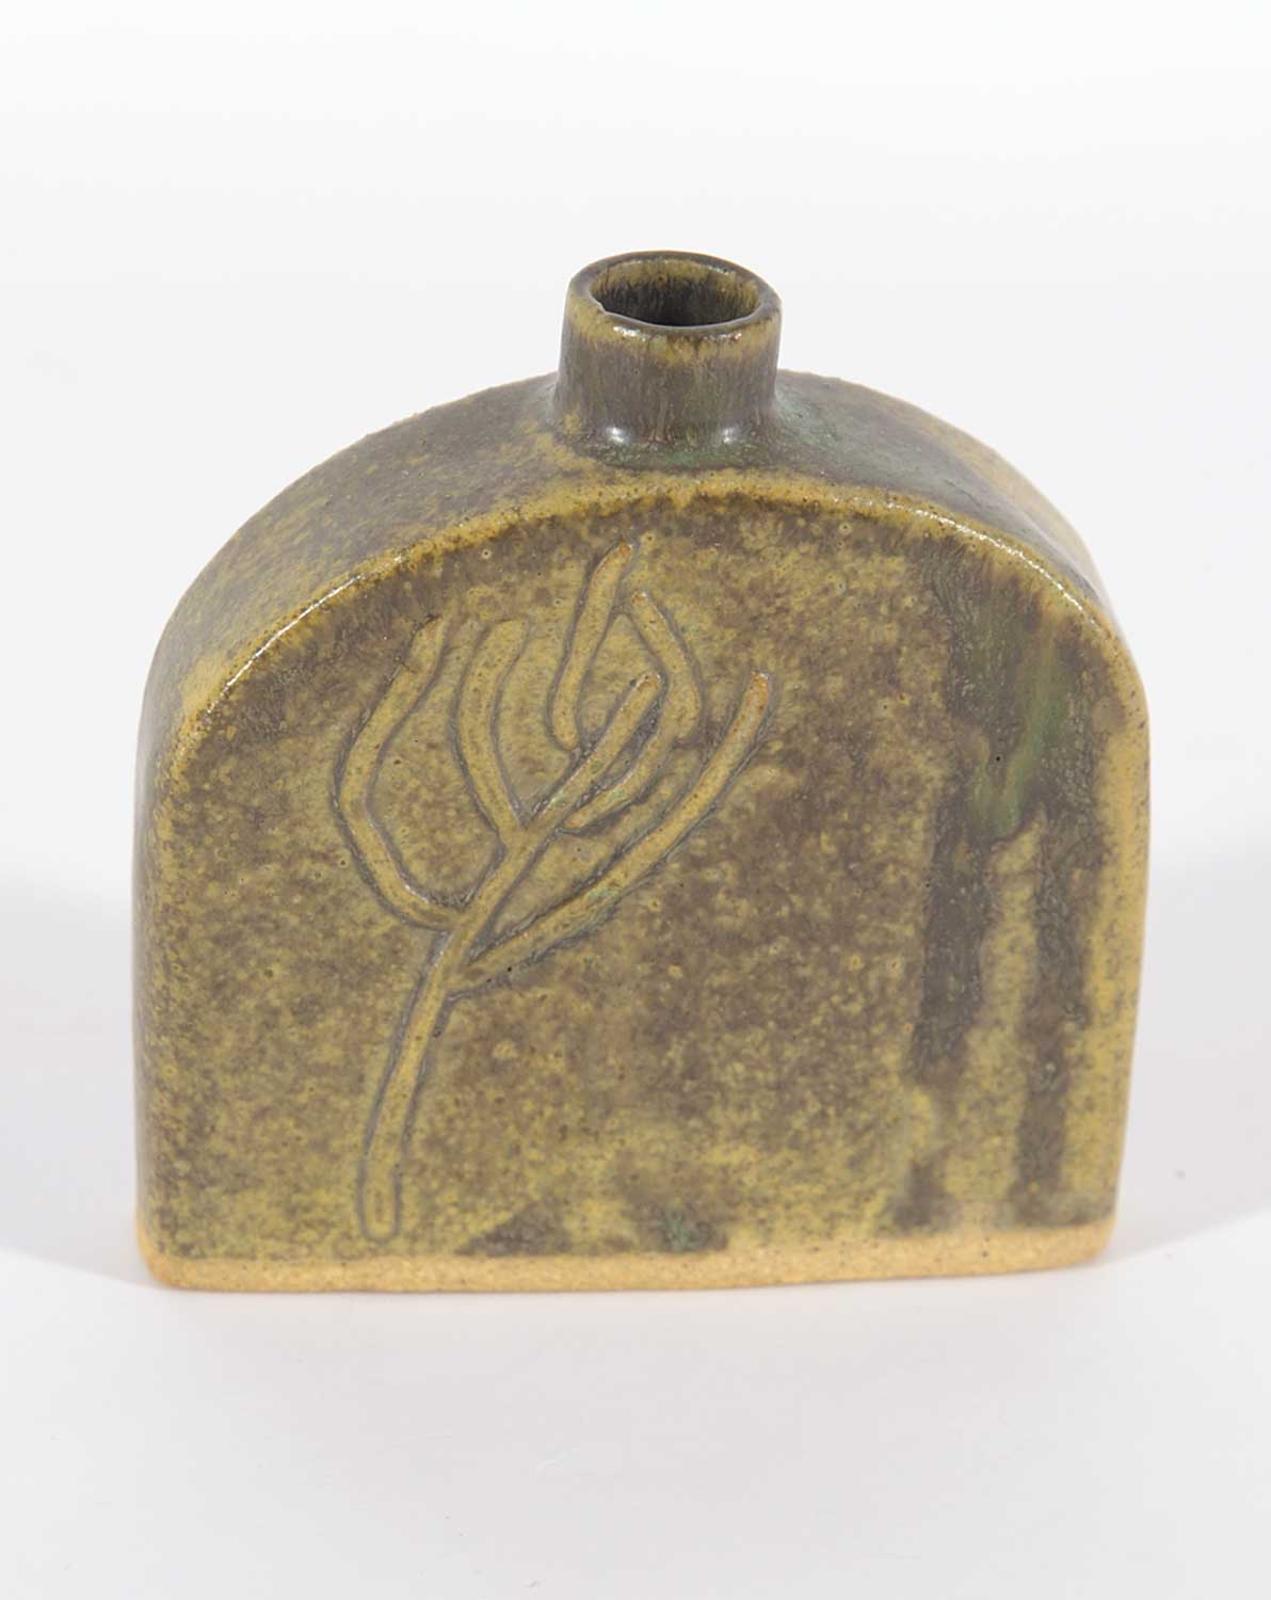 Kathleen Hamilton - Green and Brown Small Flask with Tree Designs